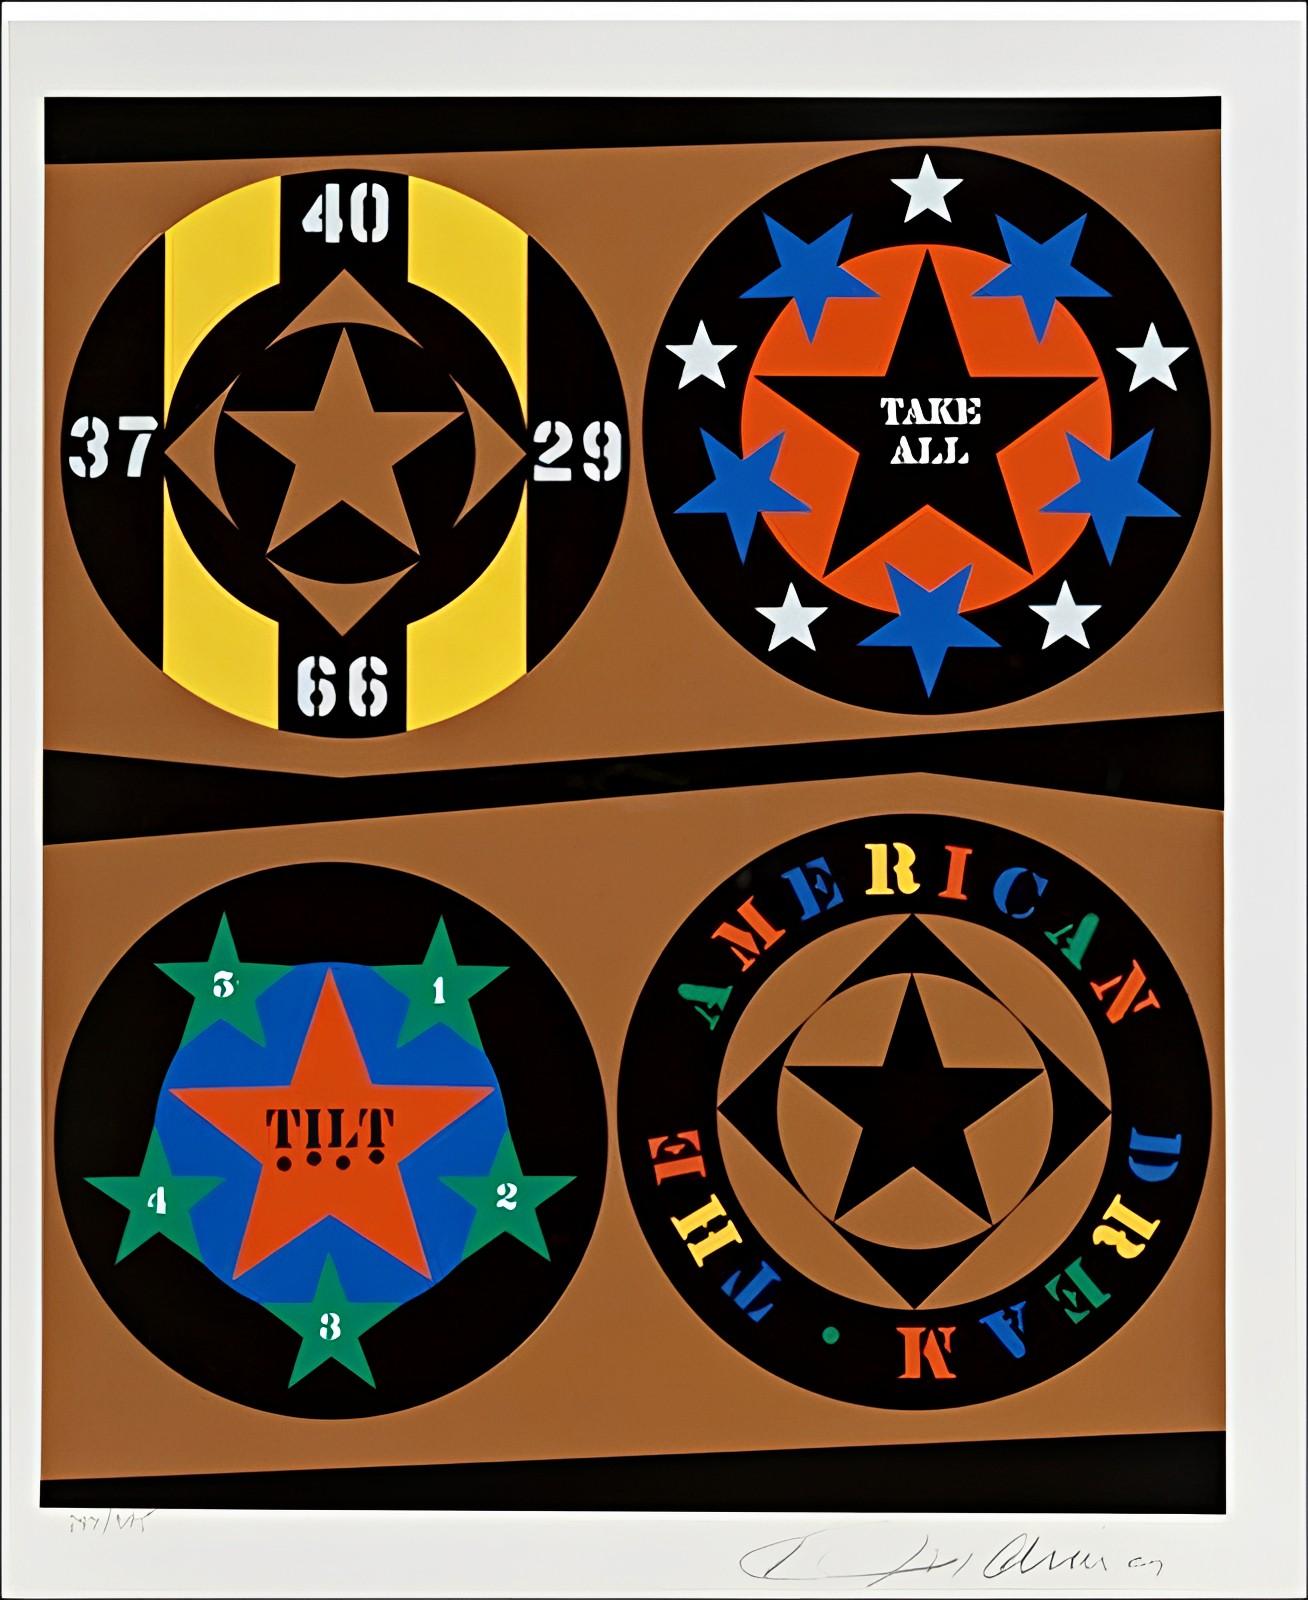 Tilt from the American Dream Portfolio - Print by Robert Indiana